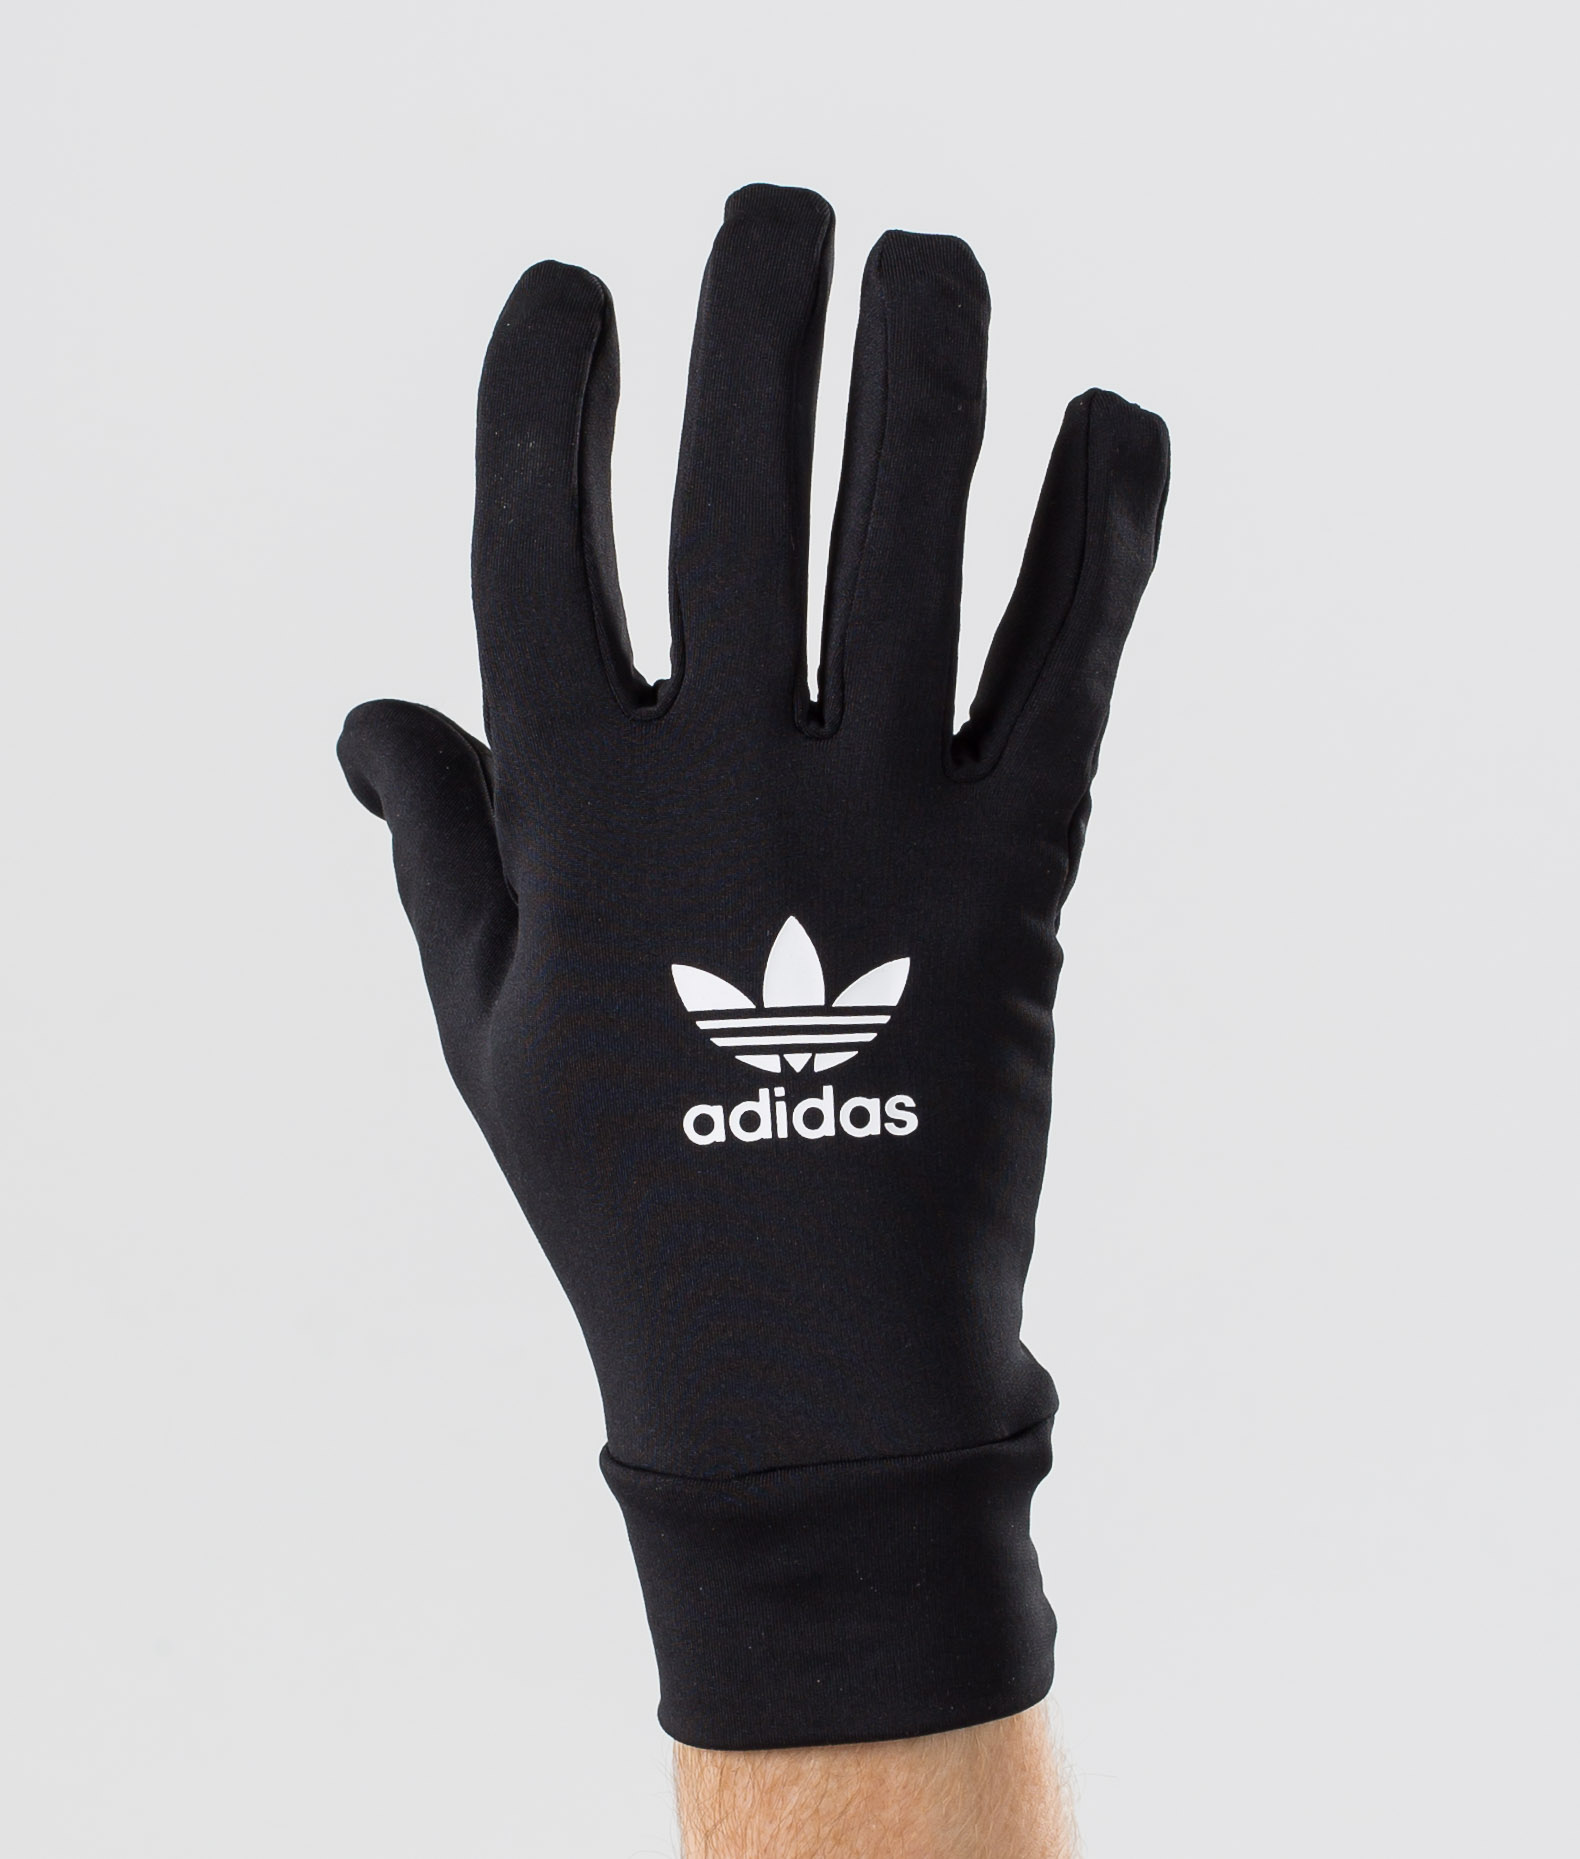 adidas hand gloves for winter